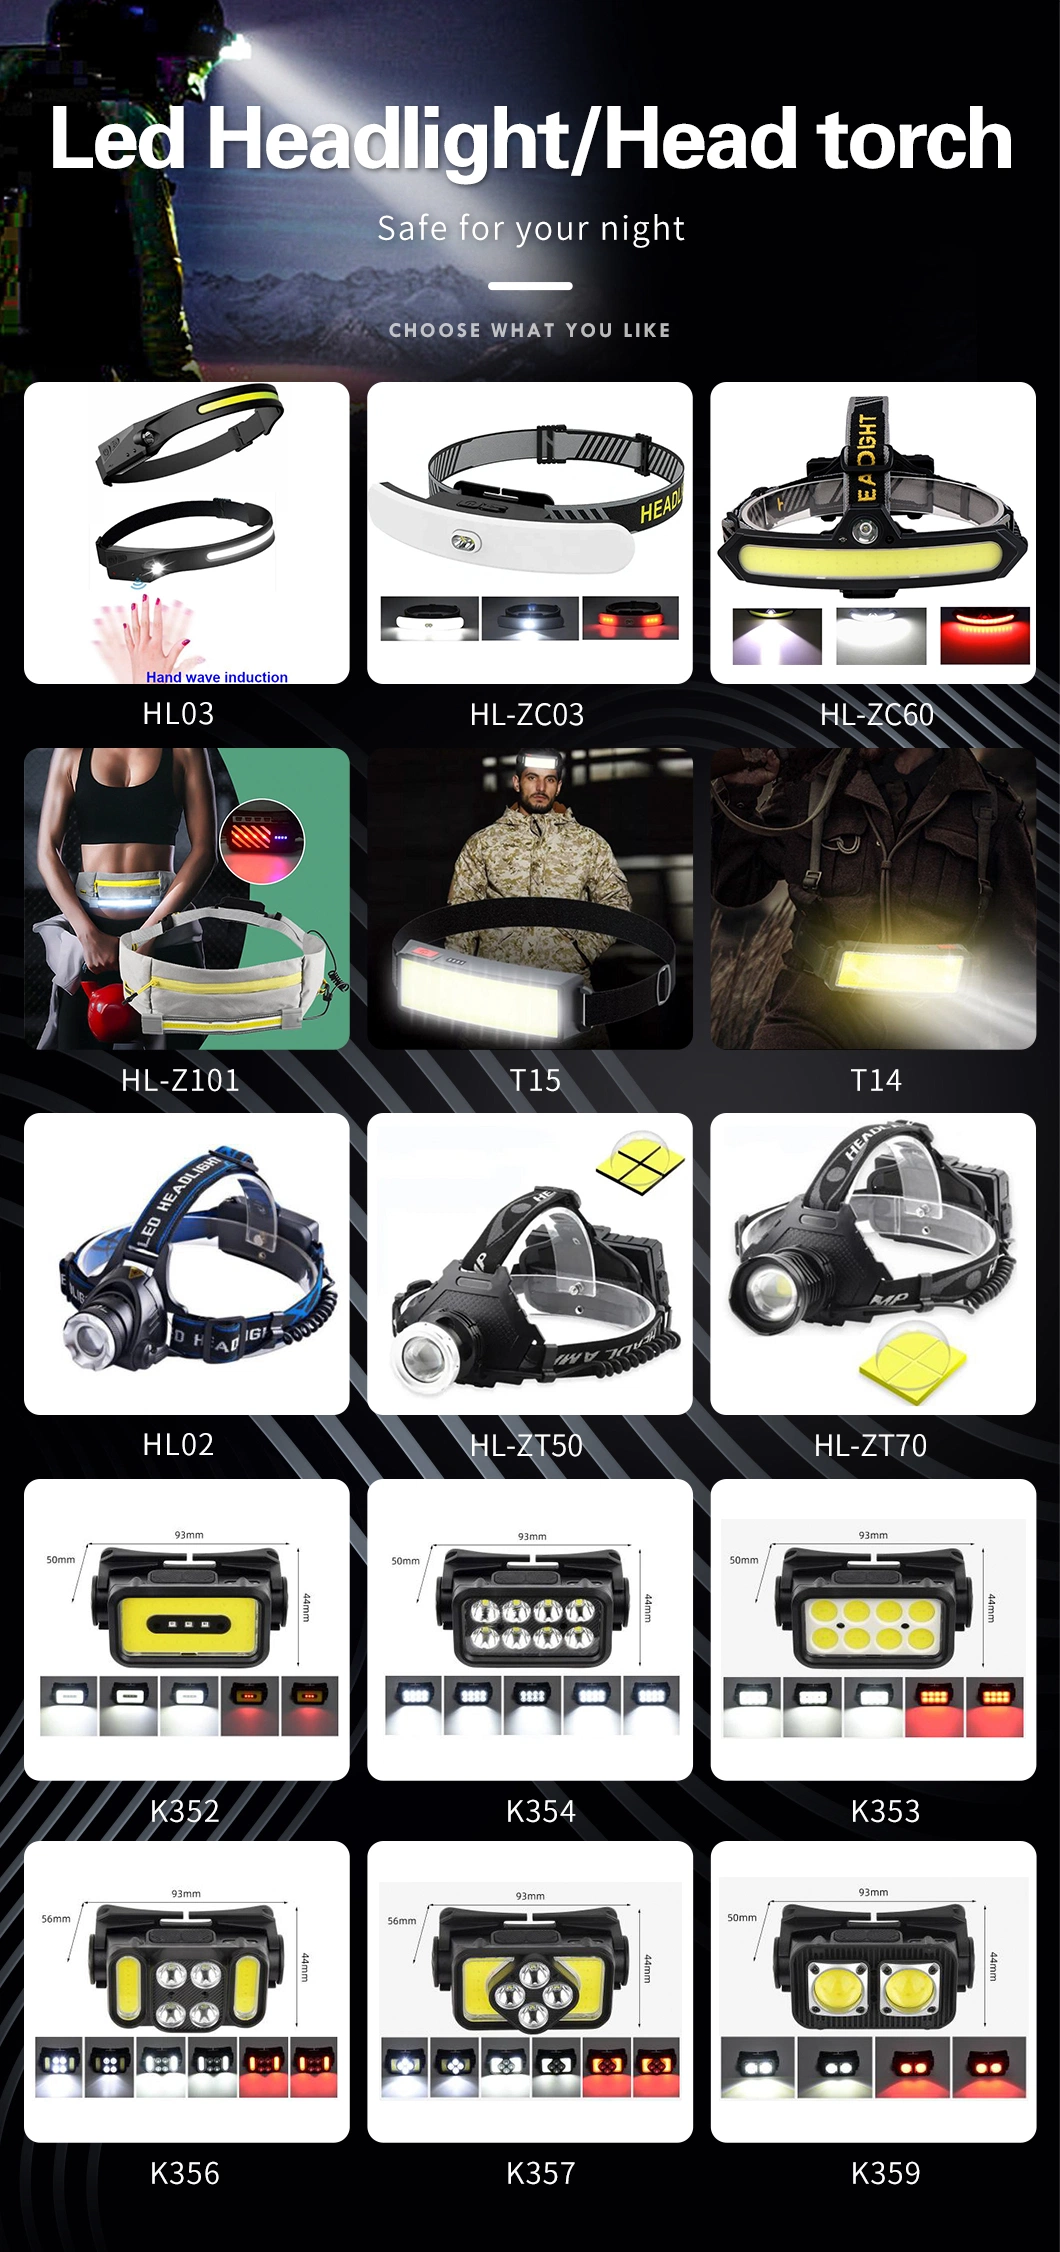 LED Headlamp High Power for Hiking Motion Sensor with Battery Indication